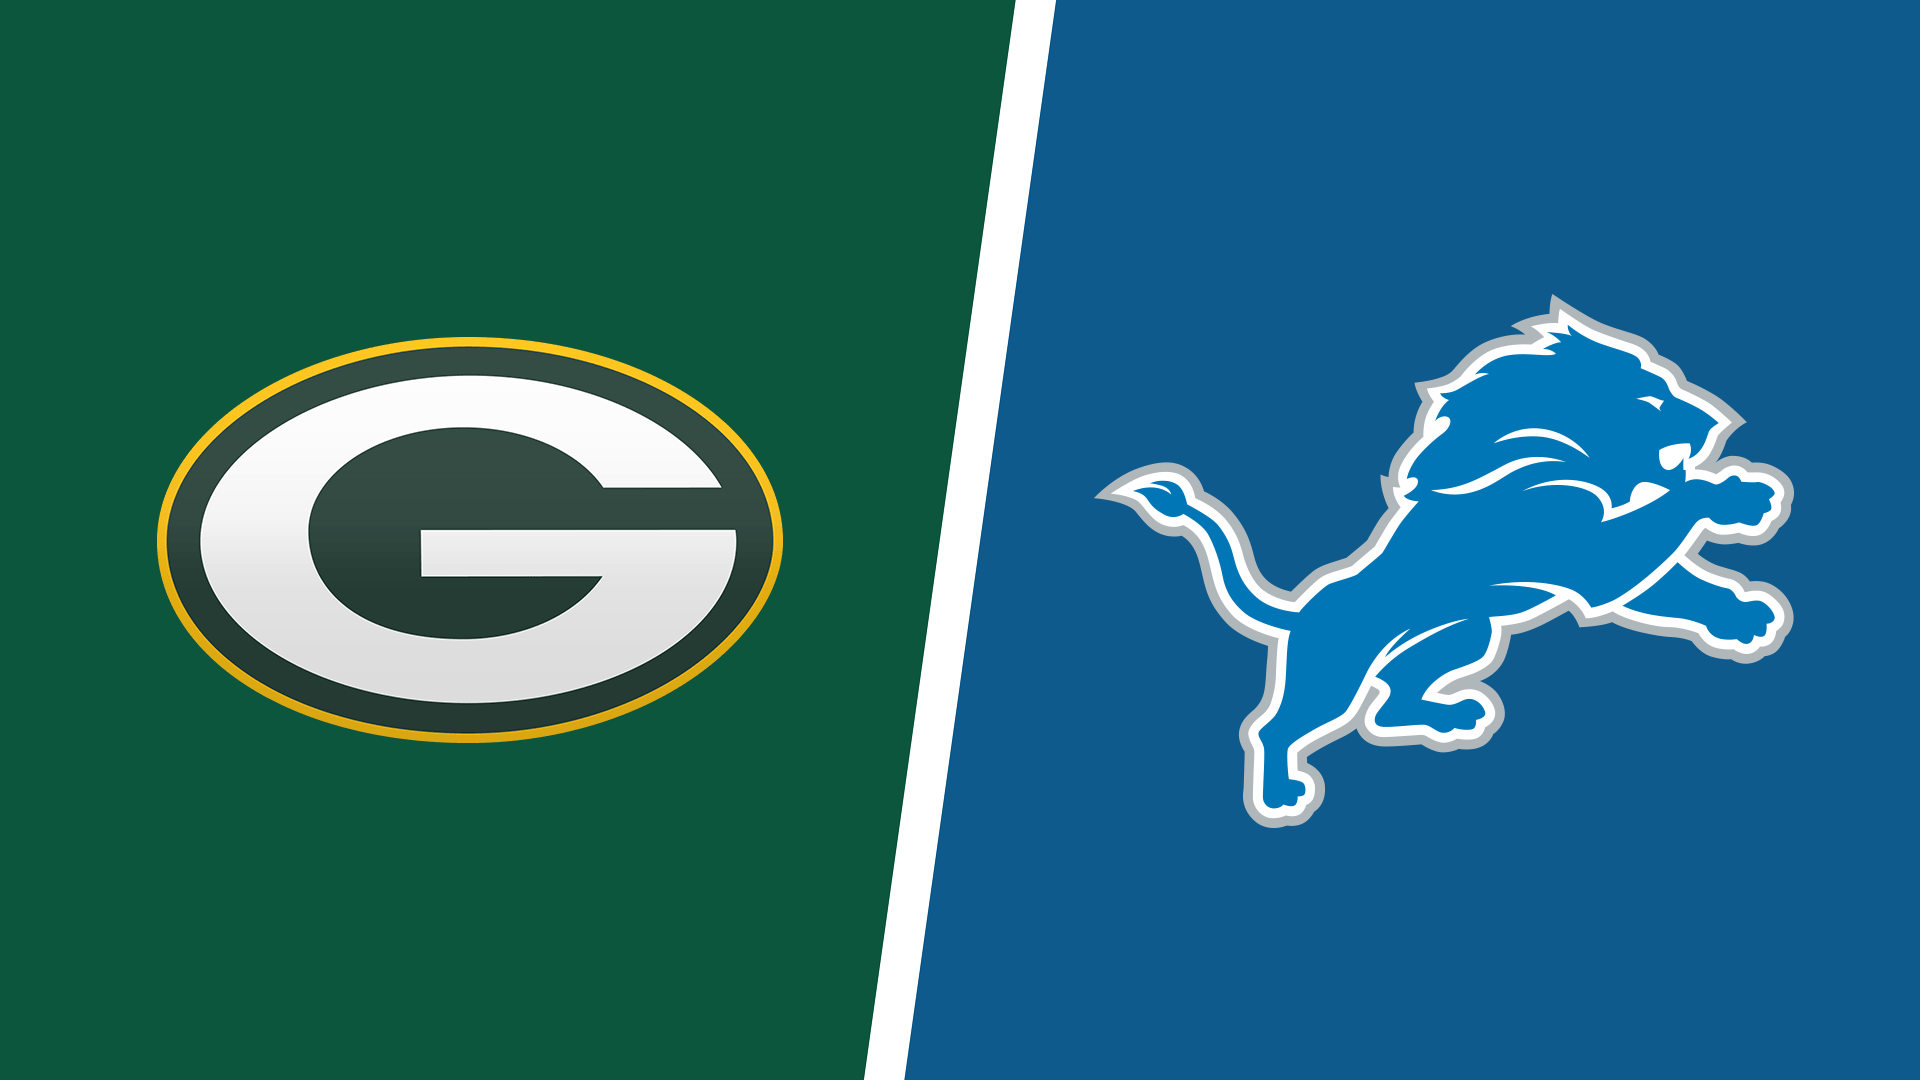 Thursday Night Football: How to Watch, Stream Lions vs. Packers